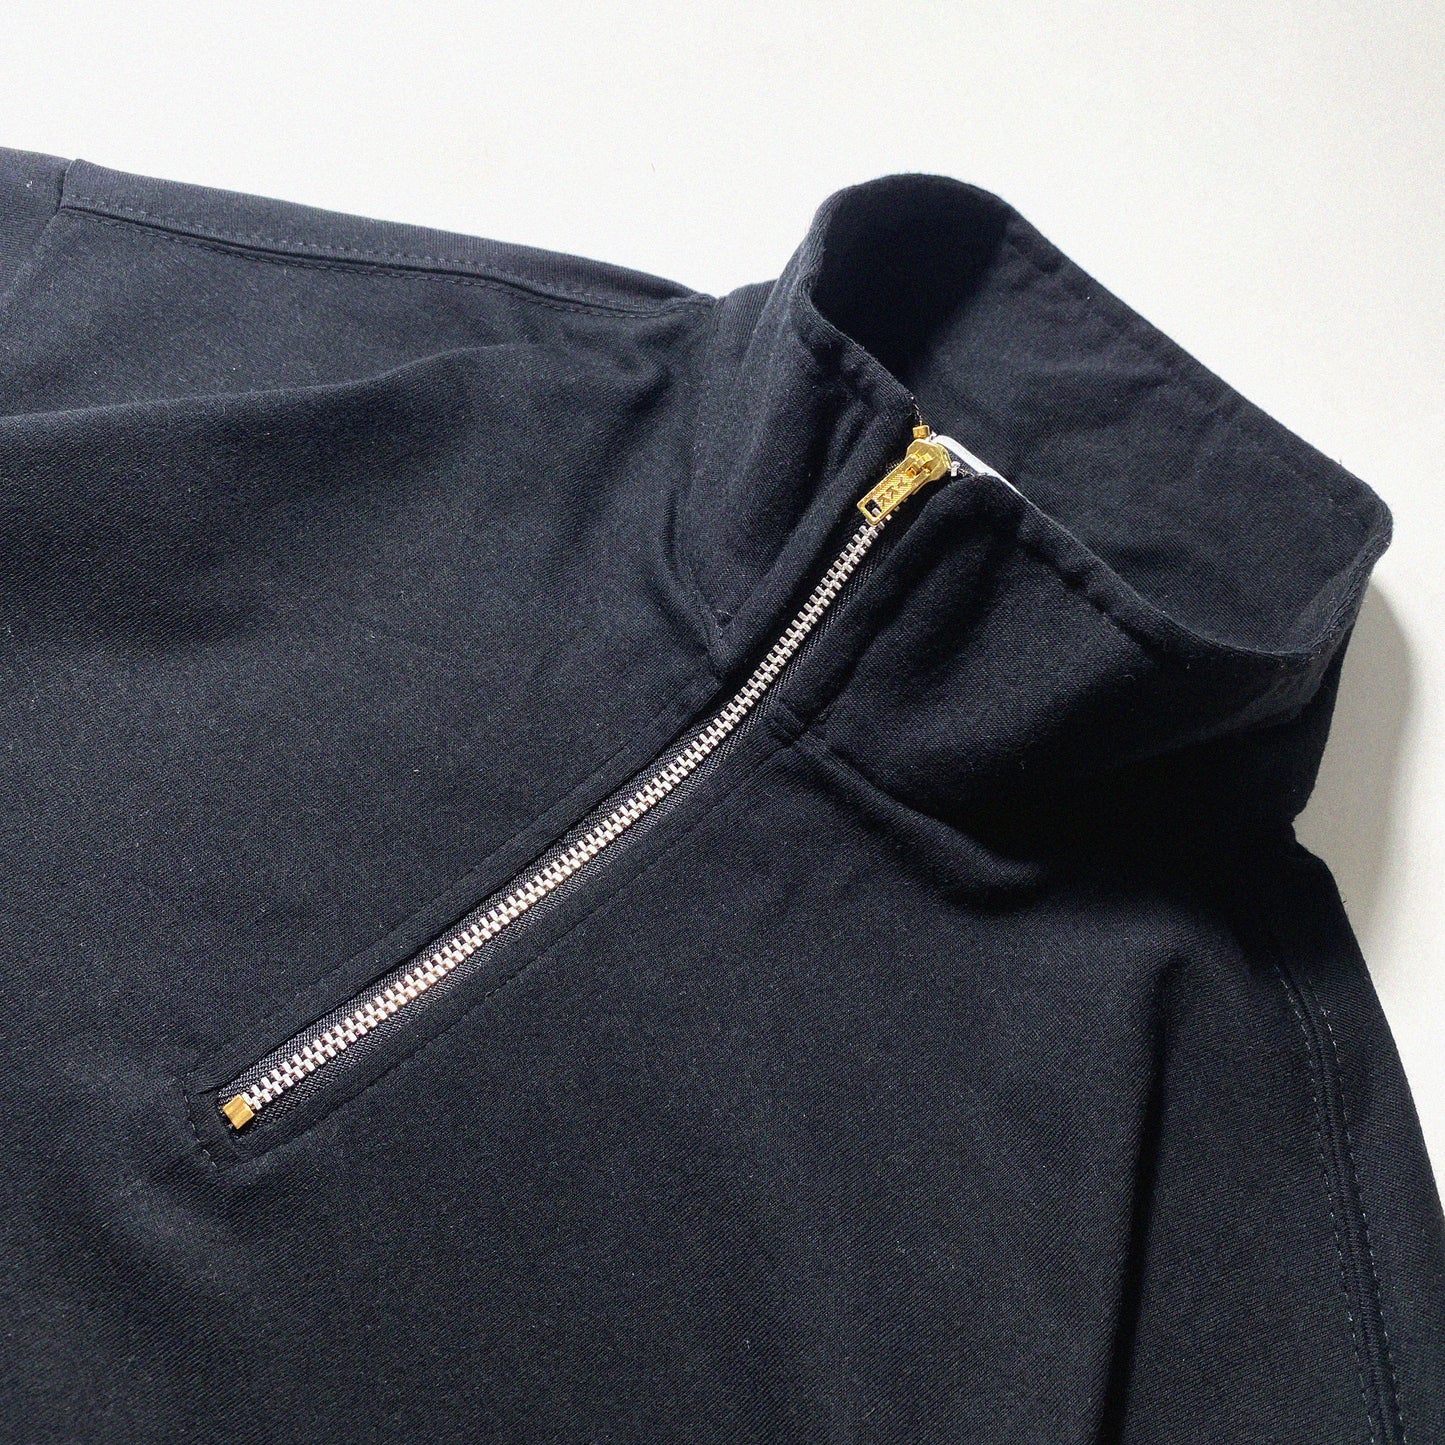 QUARTER ZIP ICONIC PATCH | BOXY FIT IN BLACK